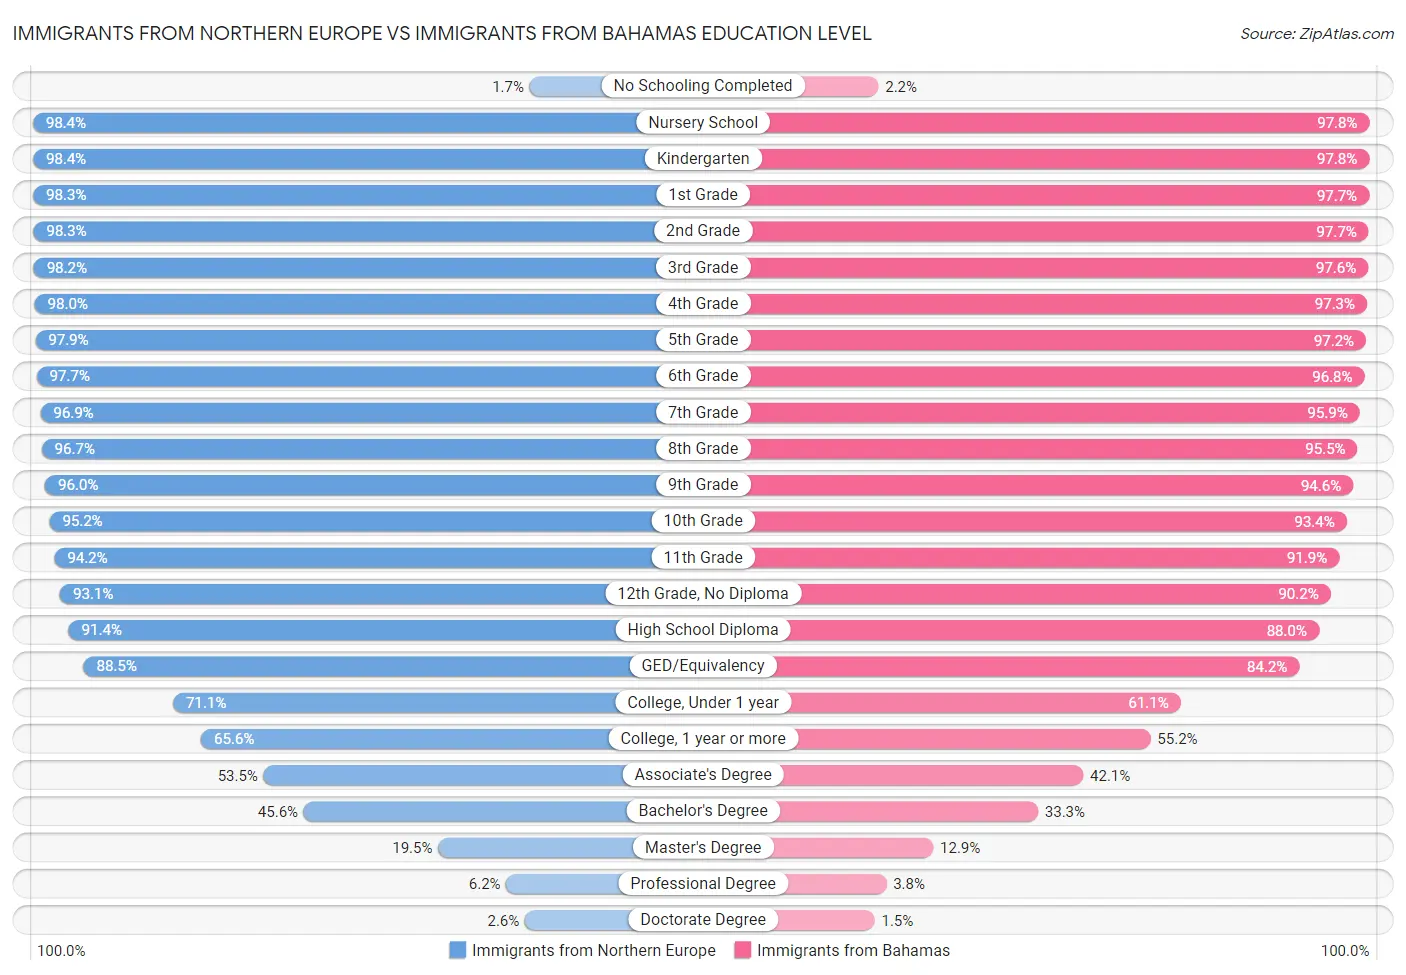 Immigrants from Northern Europe vs Immigrants from Bahamas Education Level